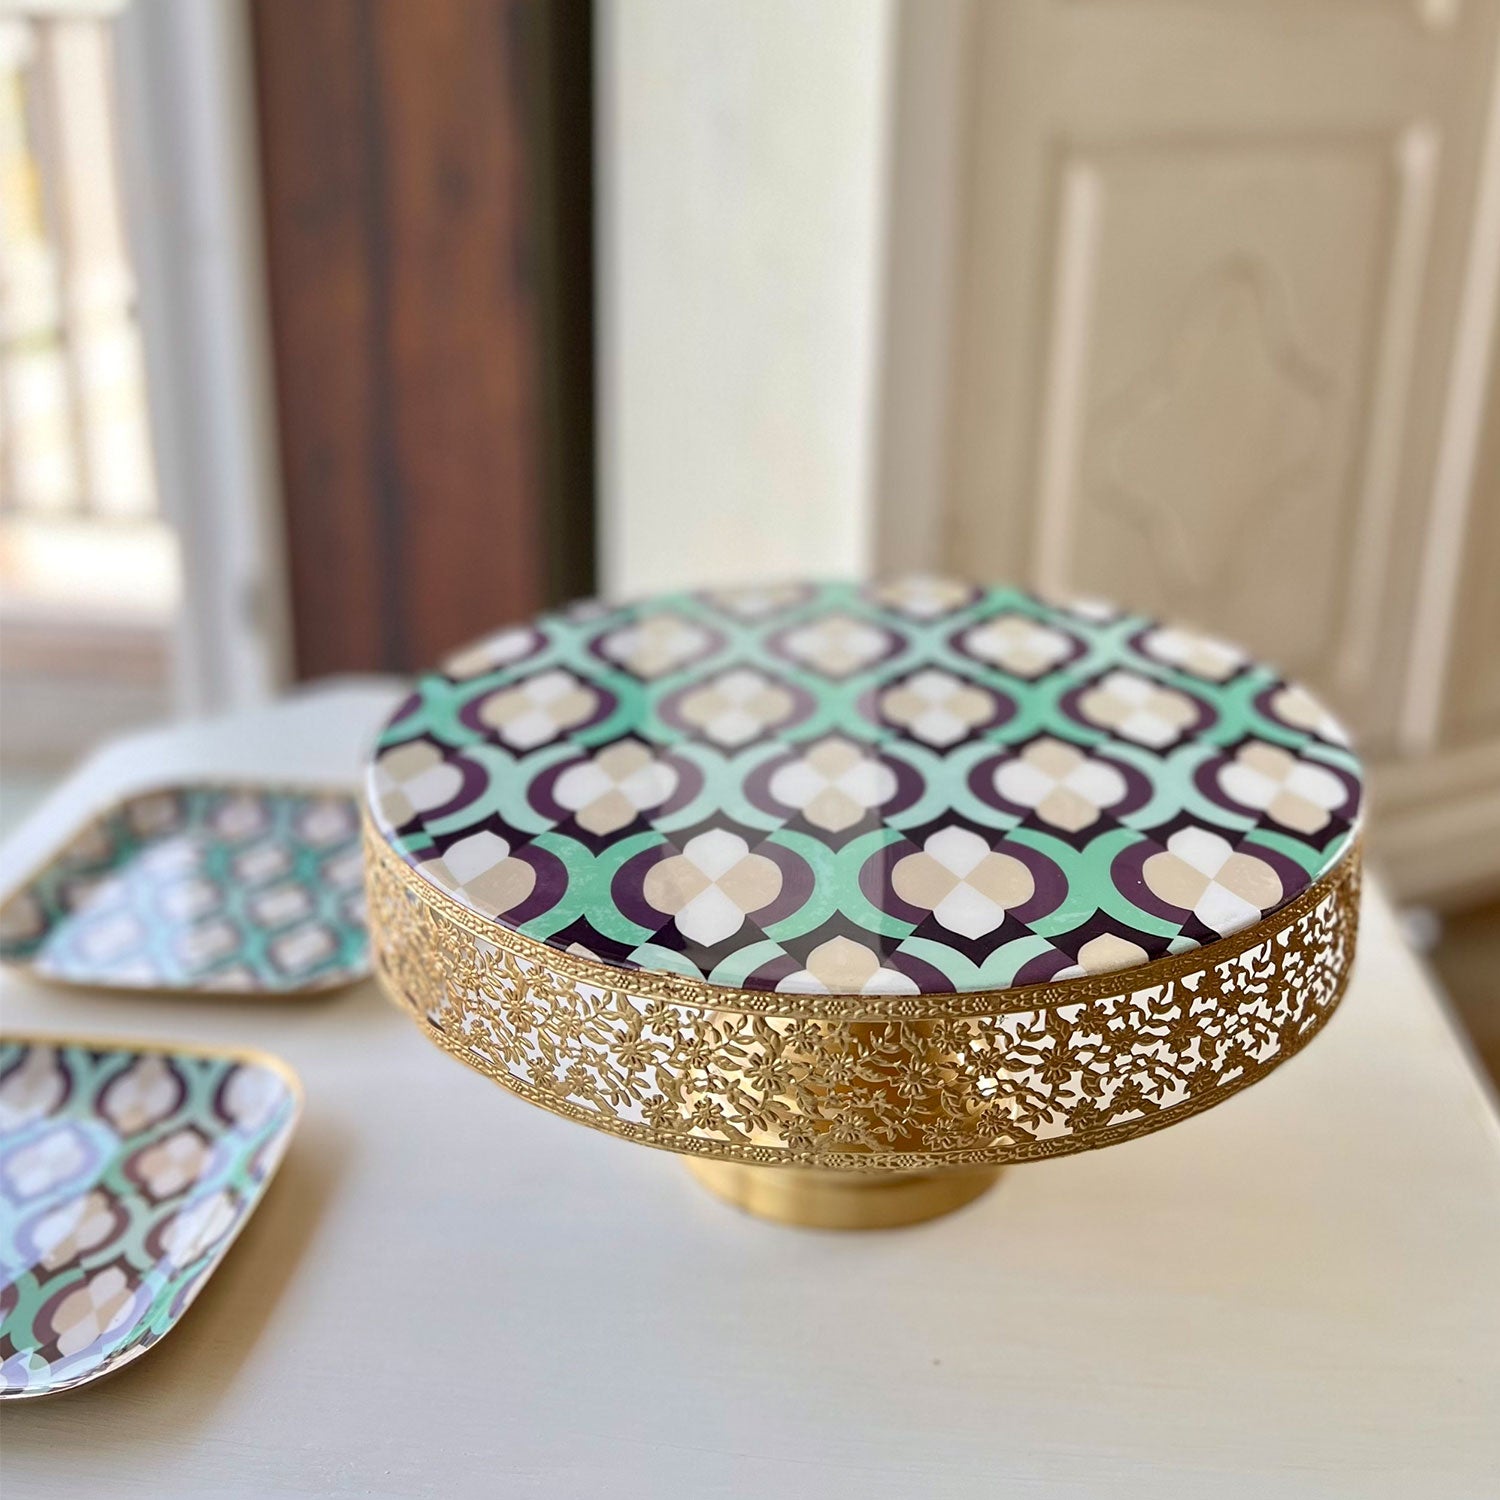 Cake Stand - Moroccan Mint